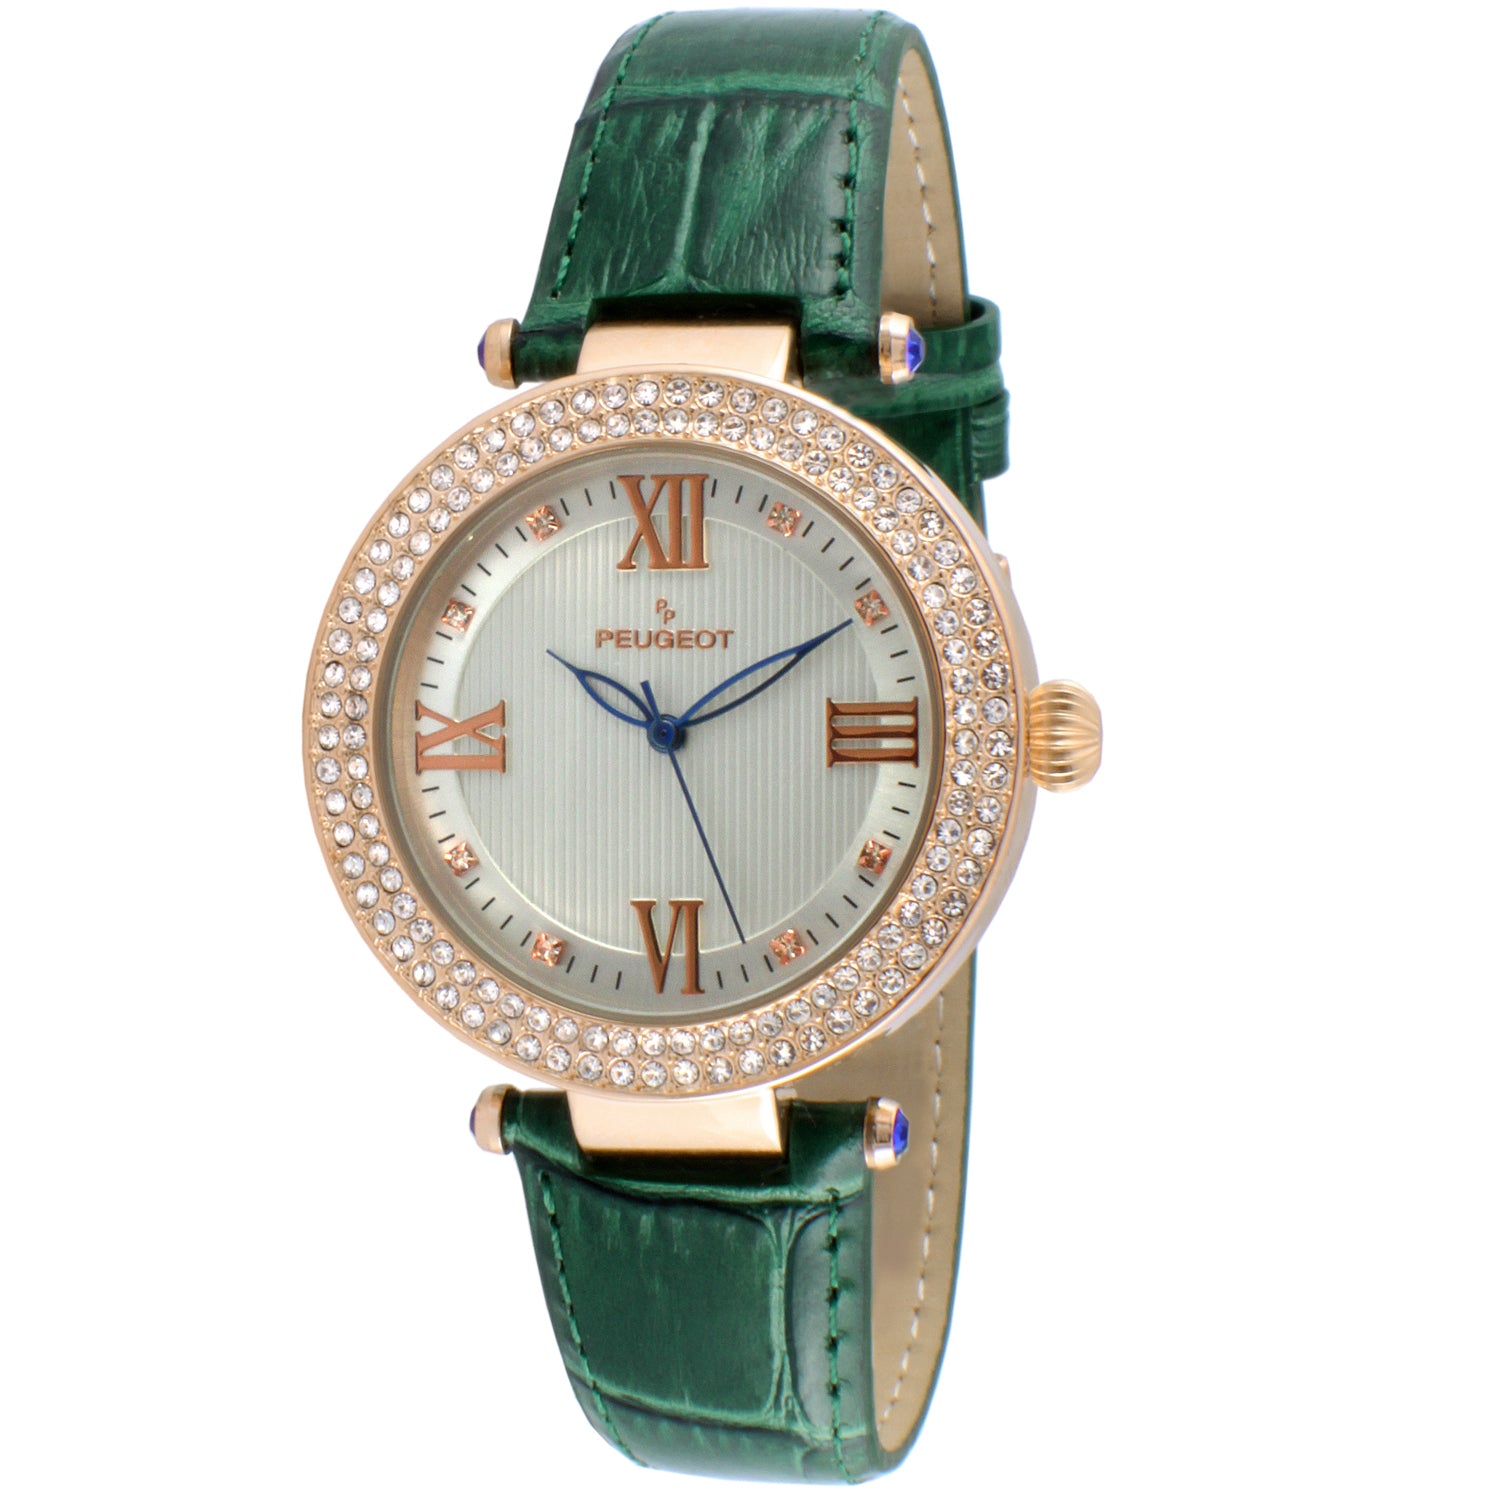 Women's Green Leather Watch - Peugeot Watches